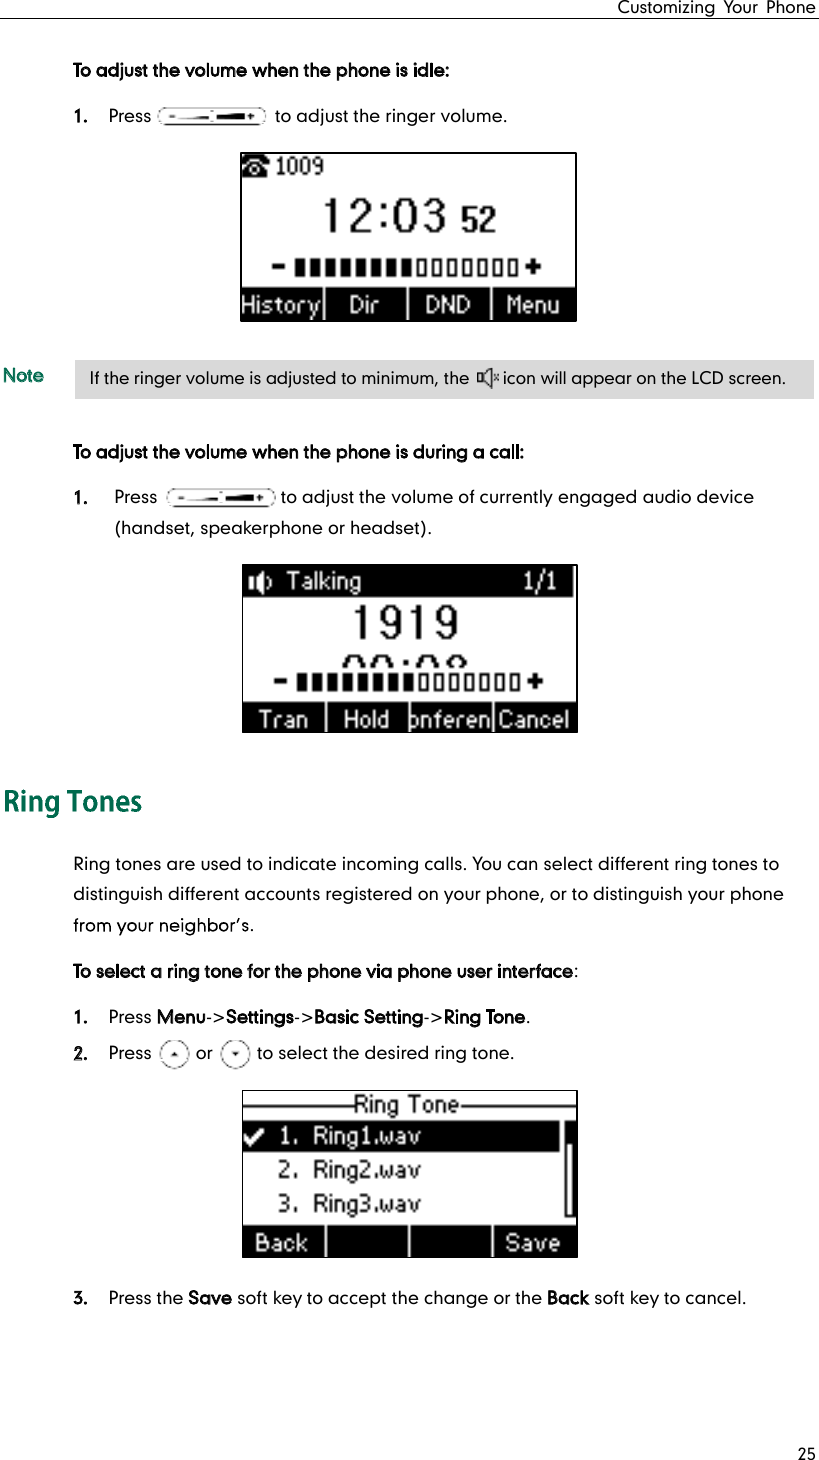 Customizing Your Phone 25 To adjust the volume when the phone is idle: 1. Press              to adjust the ringer volume.  Note To adjust the volume when the phone is during a call: 1. Press              to adjust the volume of currently engaged audio device (handset, speakerphone or headset).  Ring tones are used to indicate incoming calls. You can select different ring tones to distinguish different accounts registered on your phone, or to distinguish your phone . To select a ring tone for the phone via phone user interface: 1. Press Menu-&gt;Settings-&gt;Basic Setting-&gt;Ring Tone. 2. Press     or     to select the desired ring tone.  3. Press the Save soft key to accept the change or the Back soft key to cancel.    If the ringer volume is adjusted to minimum, the    icon will appear on the LCD screen. 